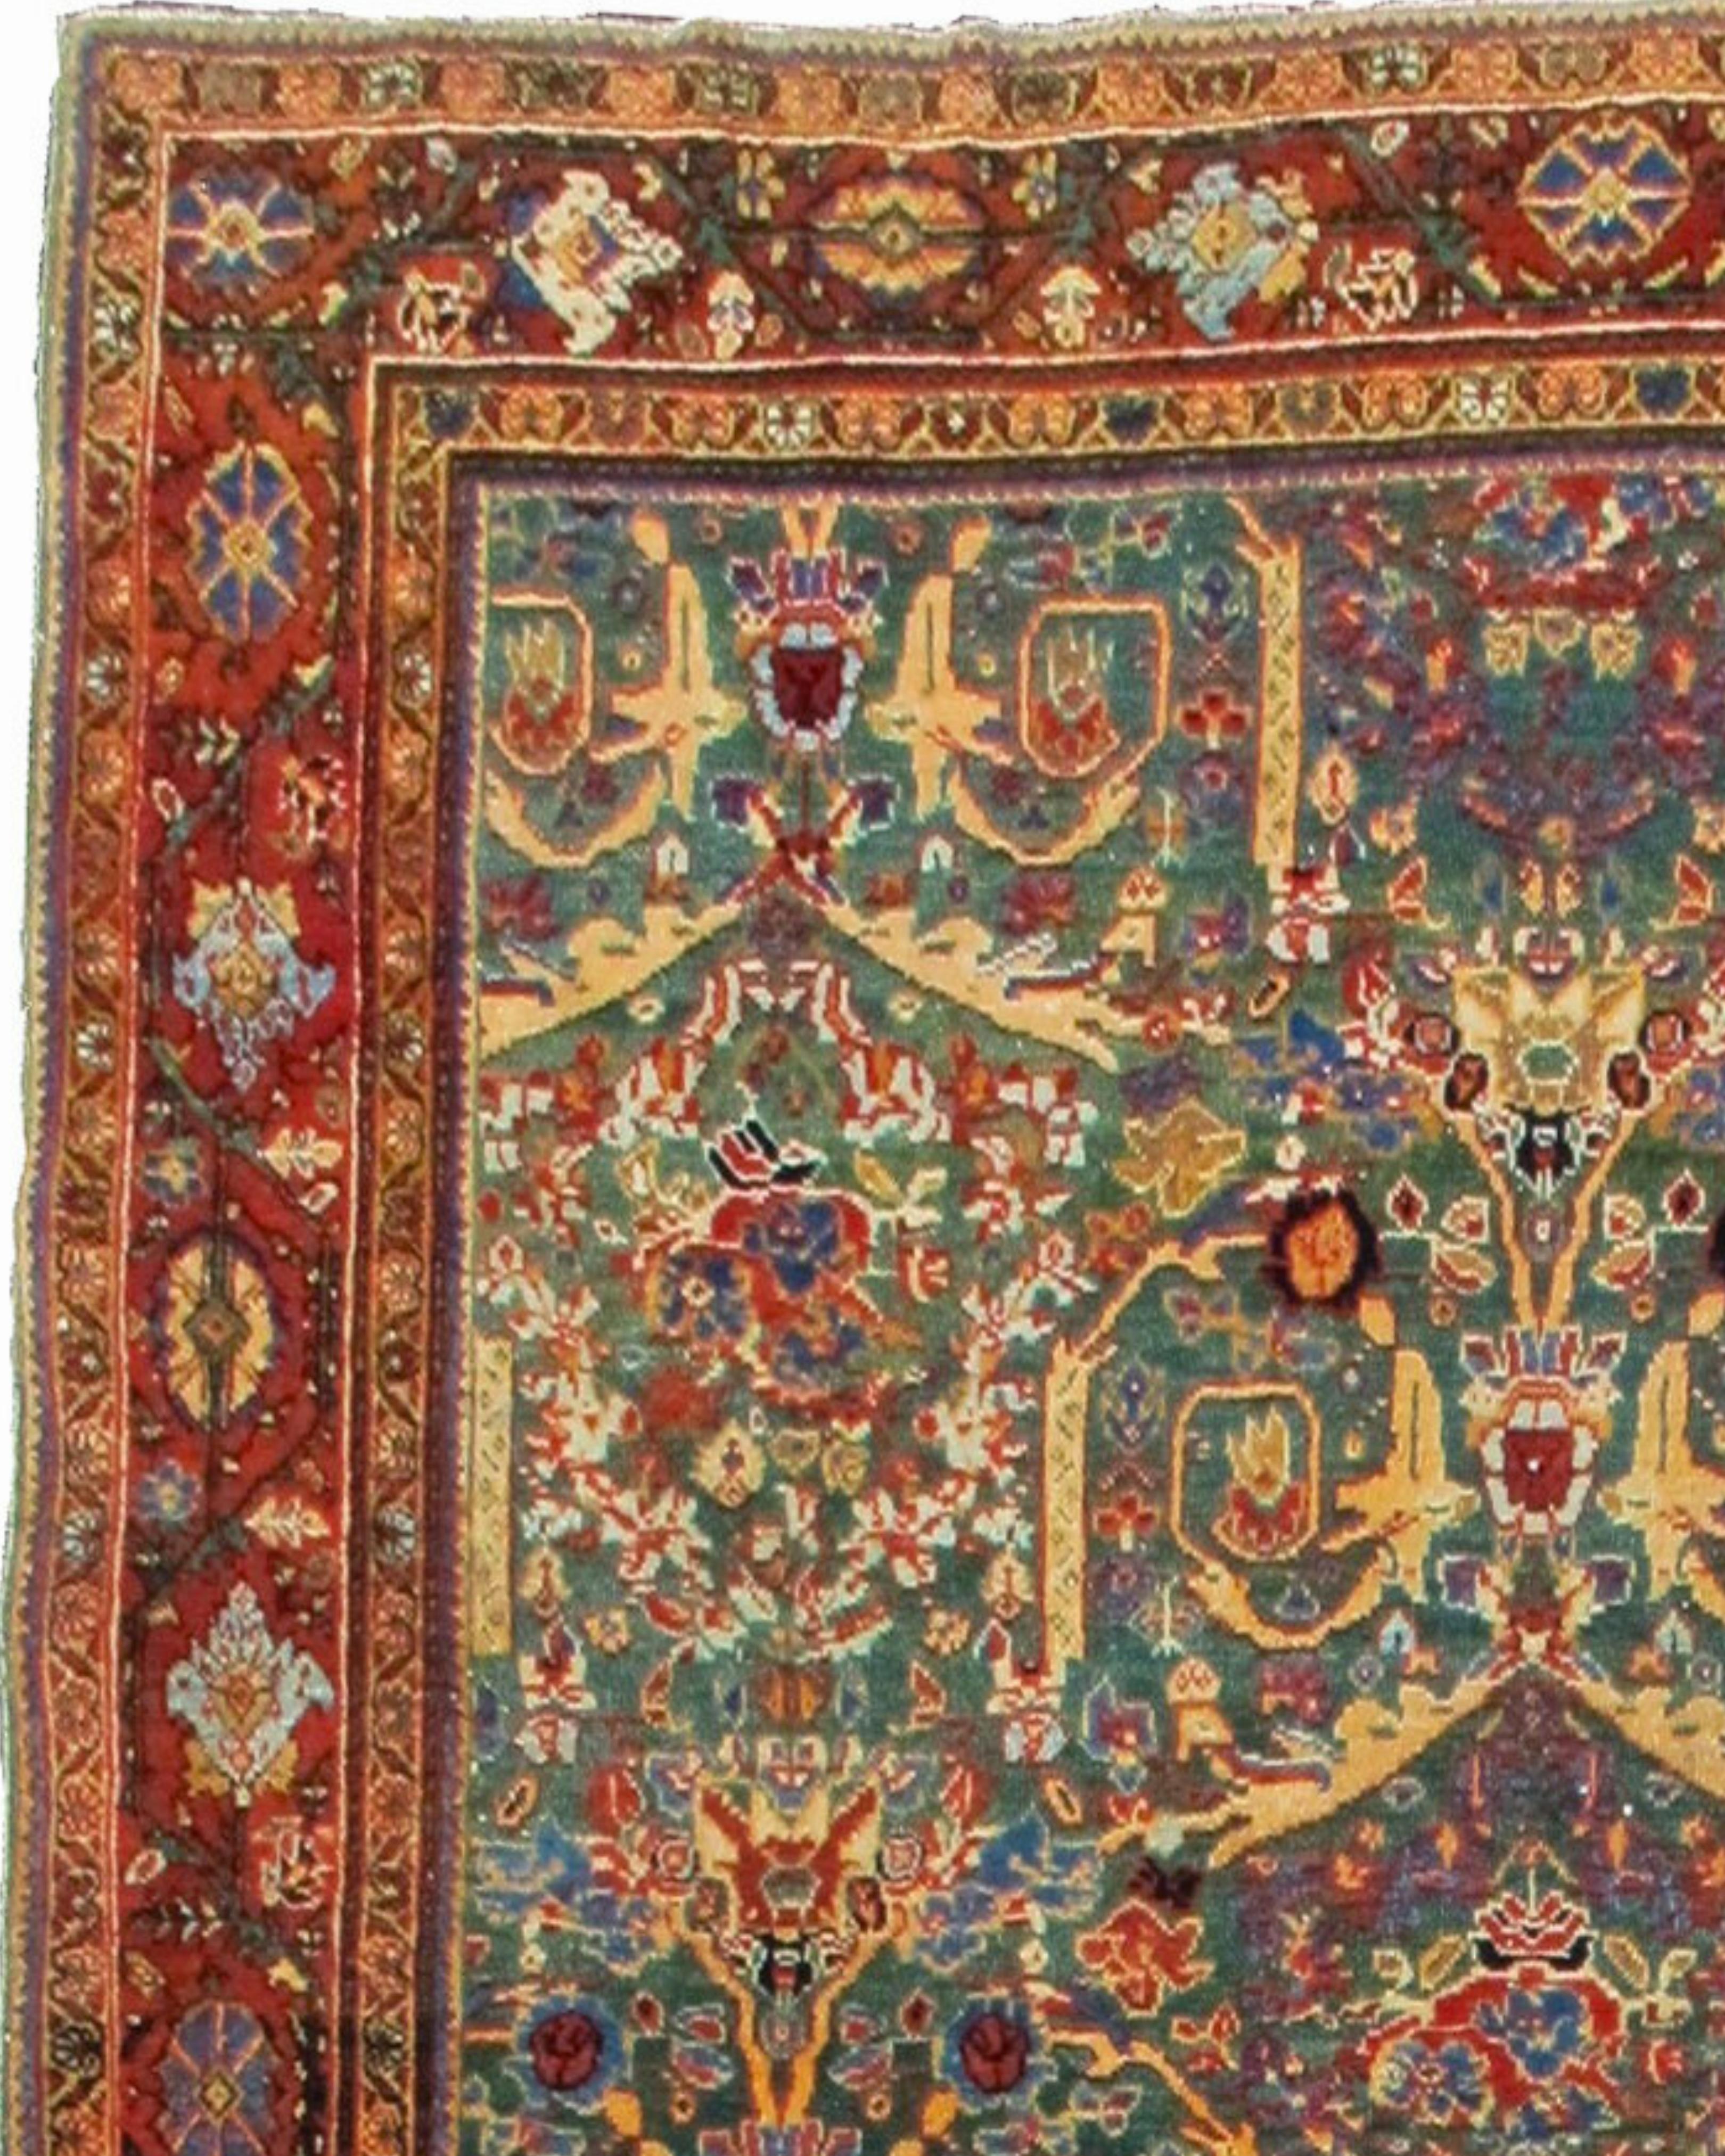 Hand-Woven Antique Persian Meghan Sarouk Rug, c. 1930 For Sale